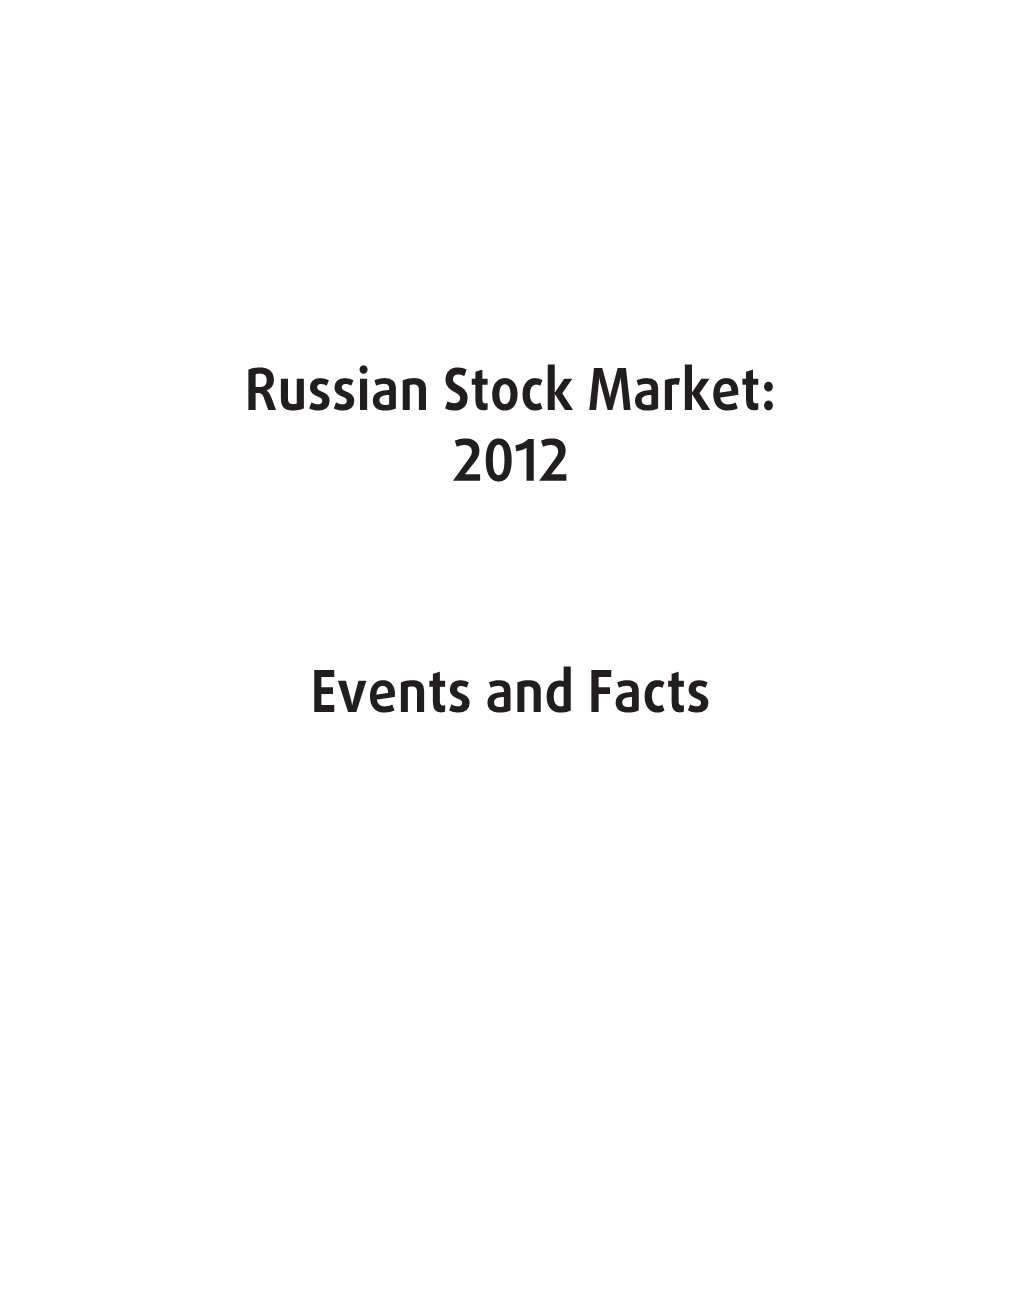 Russian Stock Market: 2012 Events and Facts